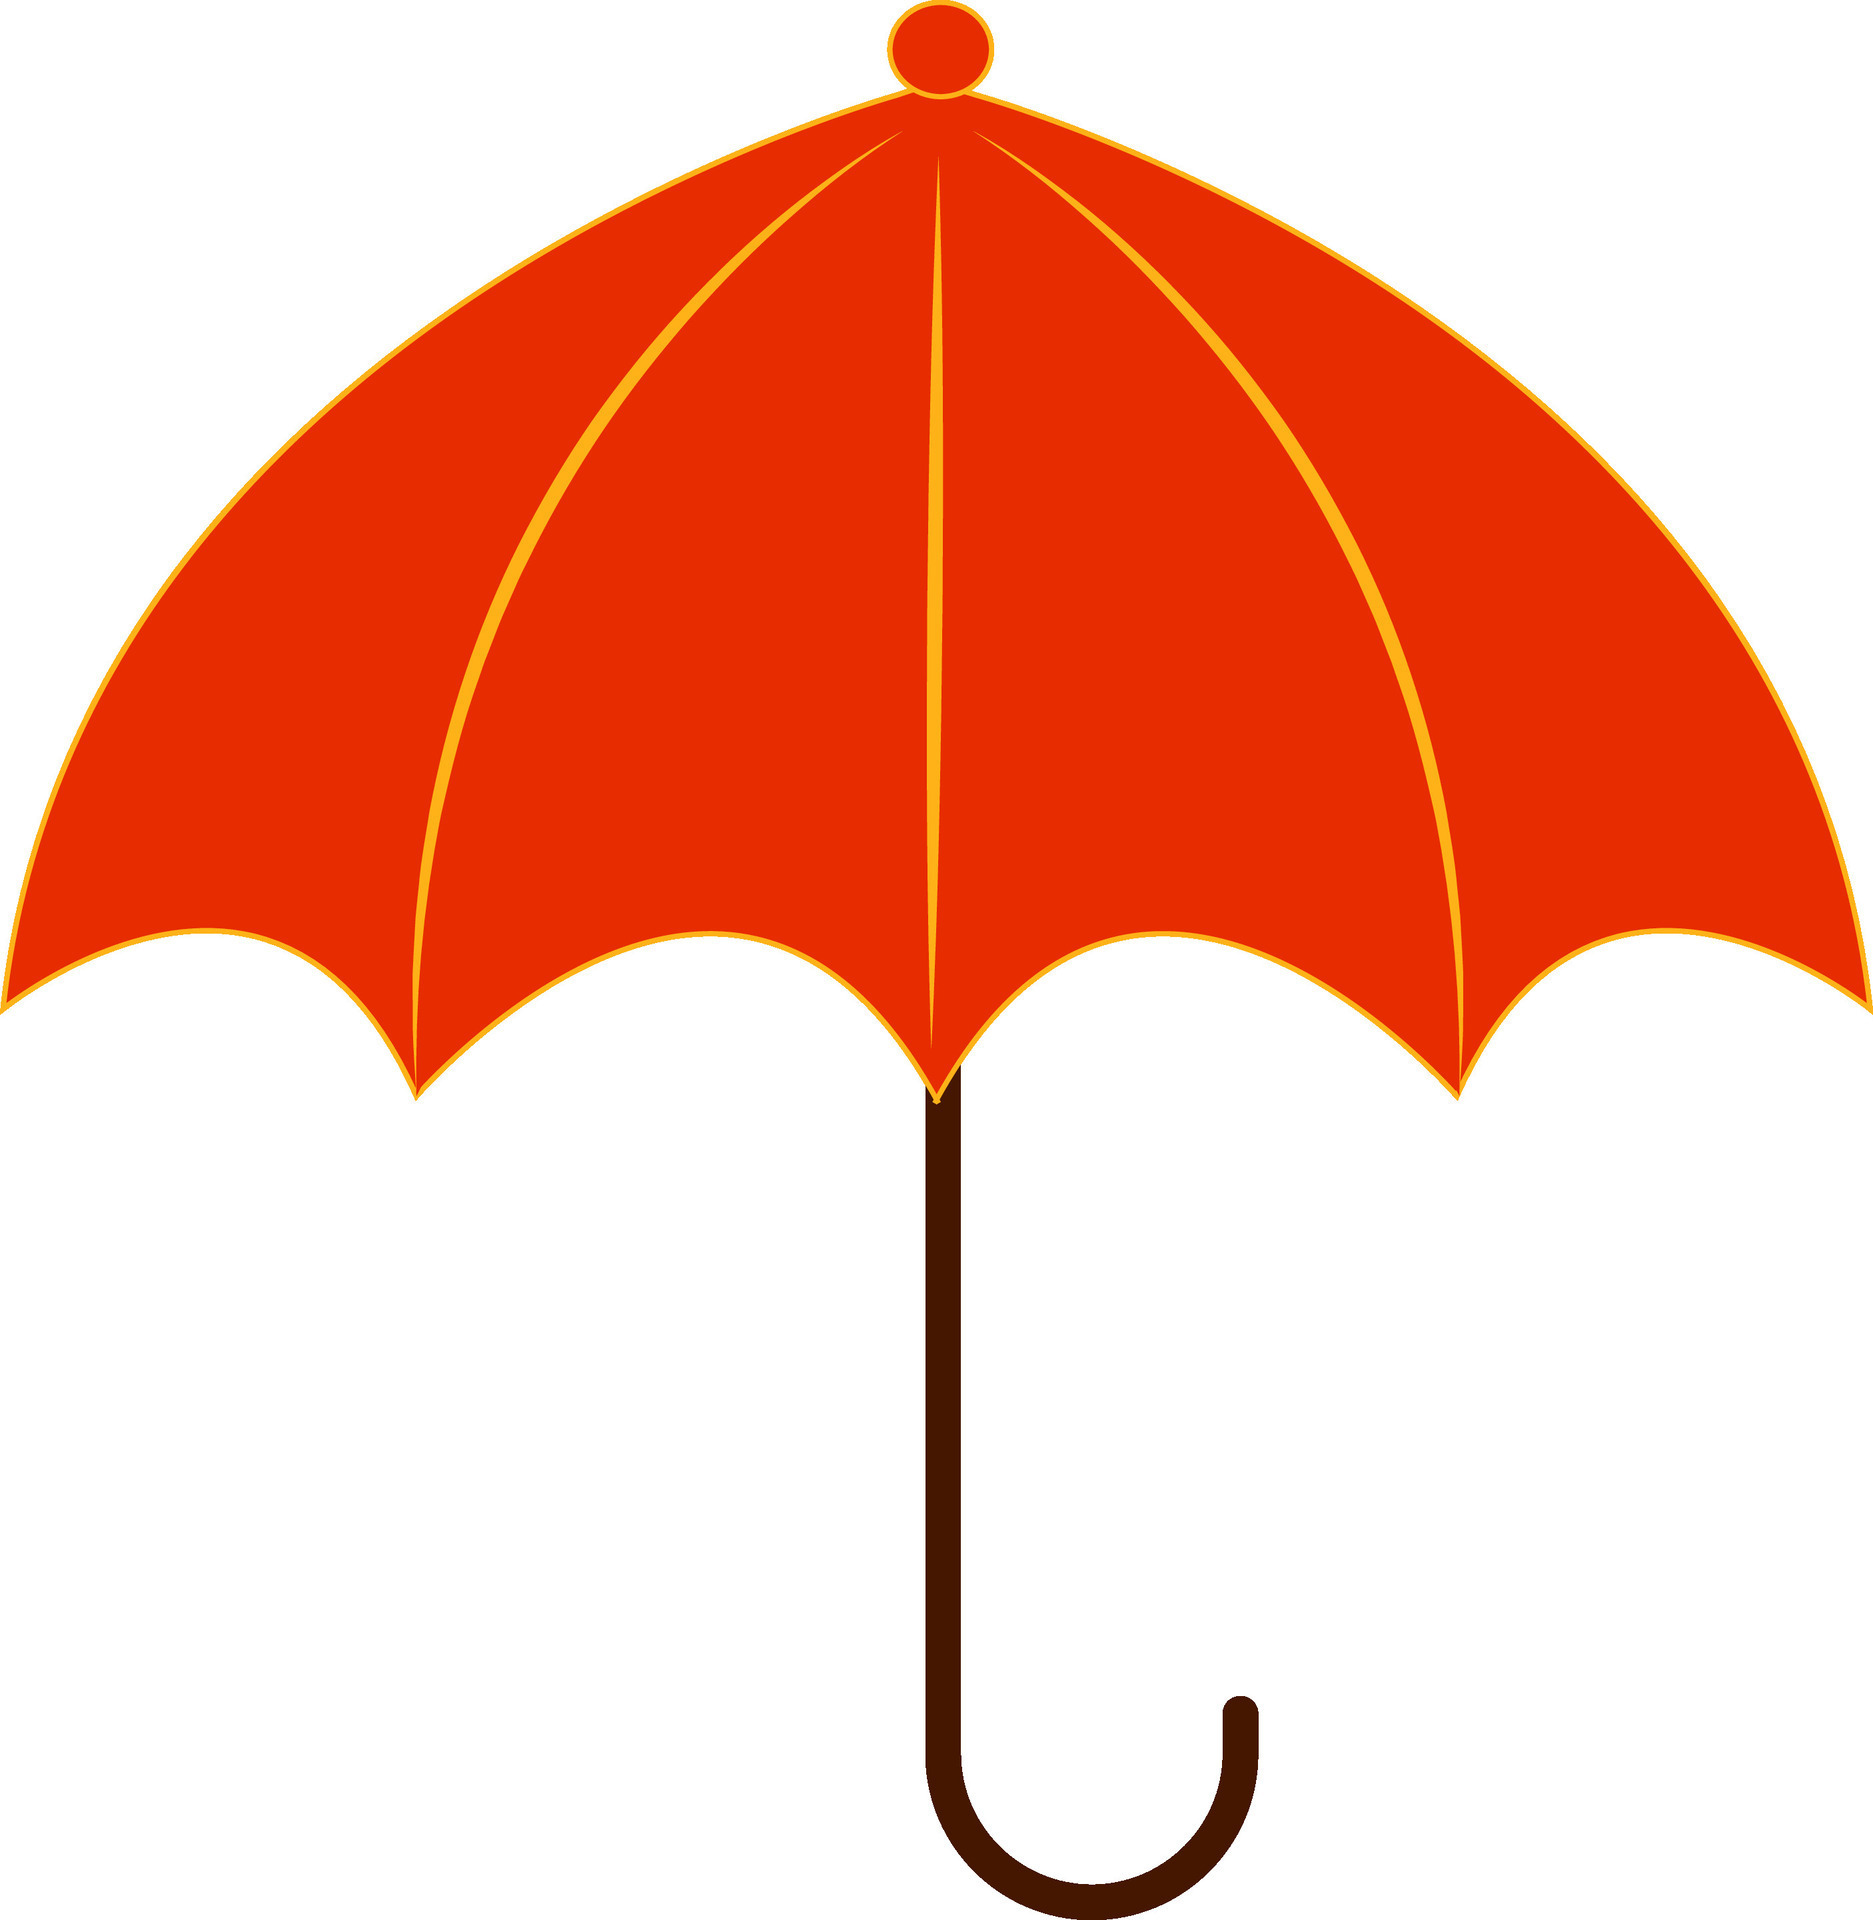 https://static.vecteezy.com/system/resources/previews/034/453/026/original/clipart-of-a-red-colored-compact-and-light-umbrellared-umbrella-with-hook-handle-looks-stylish-or-color-illustration-vector.jpg